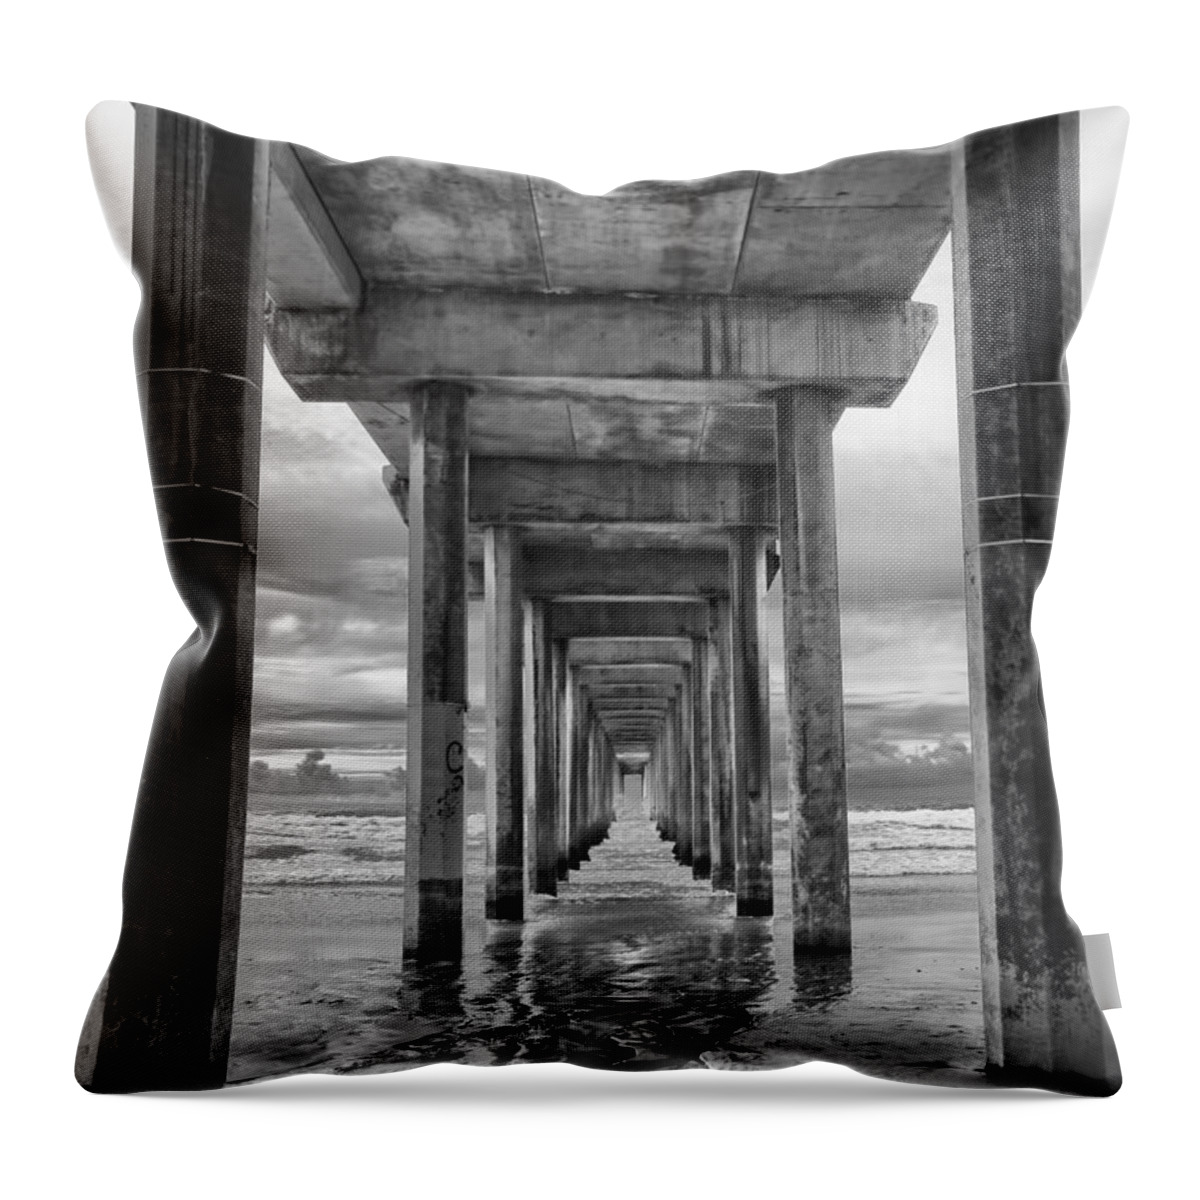 Sunset Throw Pillow featuring the photograph The Iconic Scripps Pier by Larry Marshall